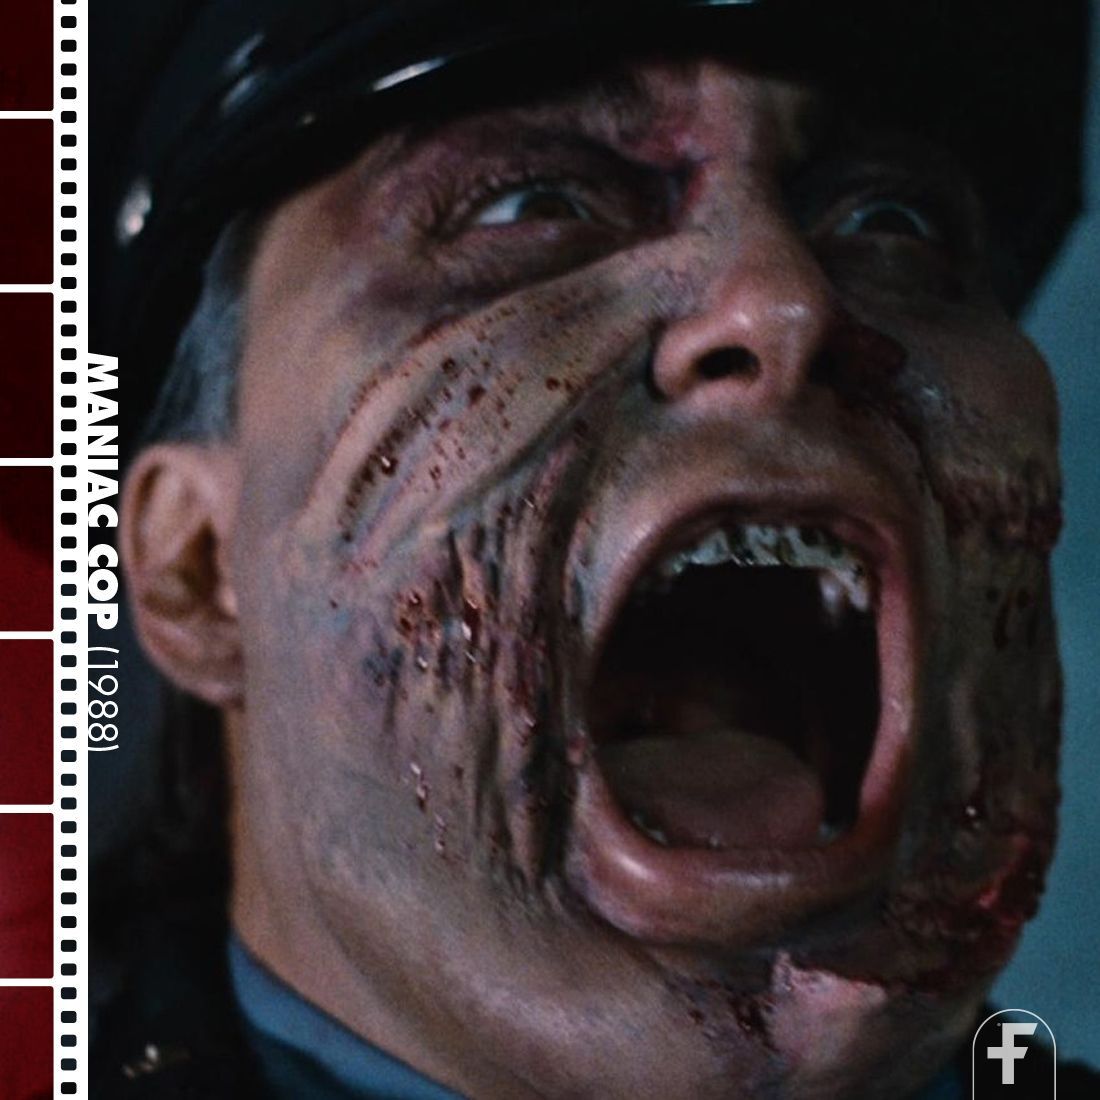 You better watch out when you hear that sound, that means that the maniac cop's around.

On this day in 1988: MANIAC COP was unleashed on audiences.